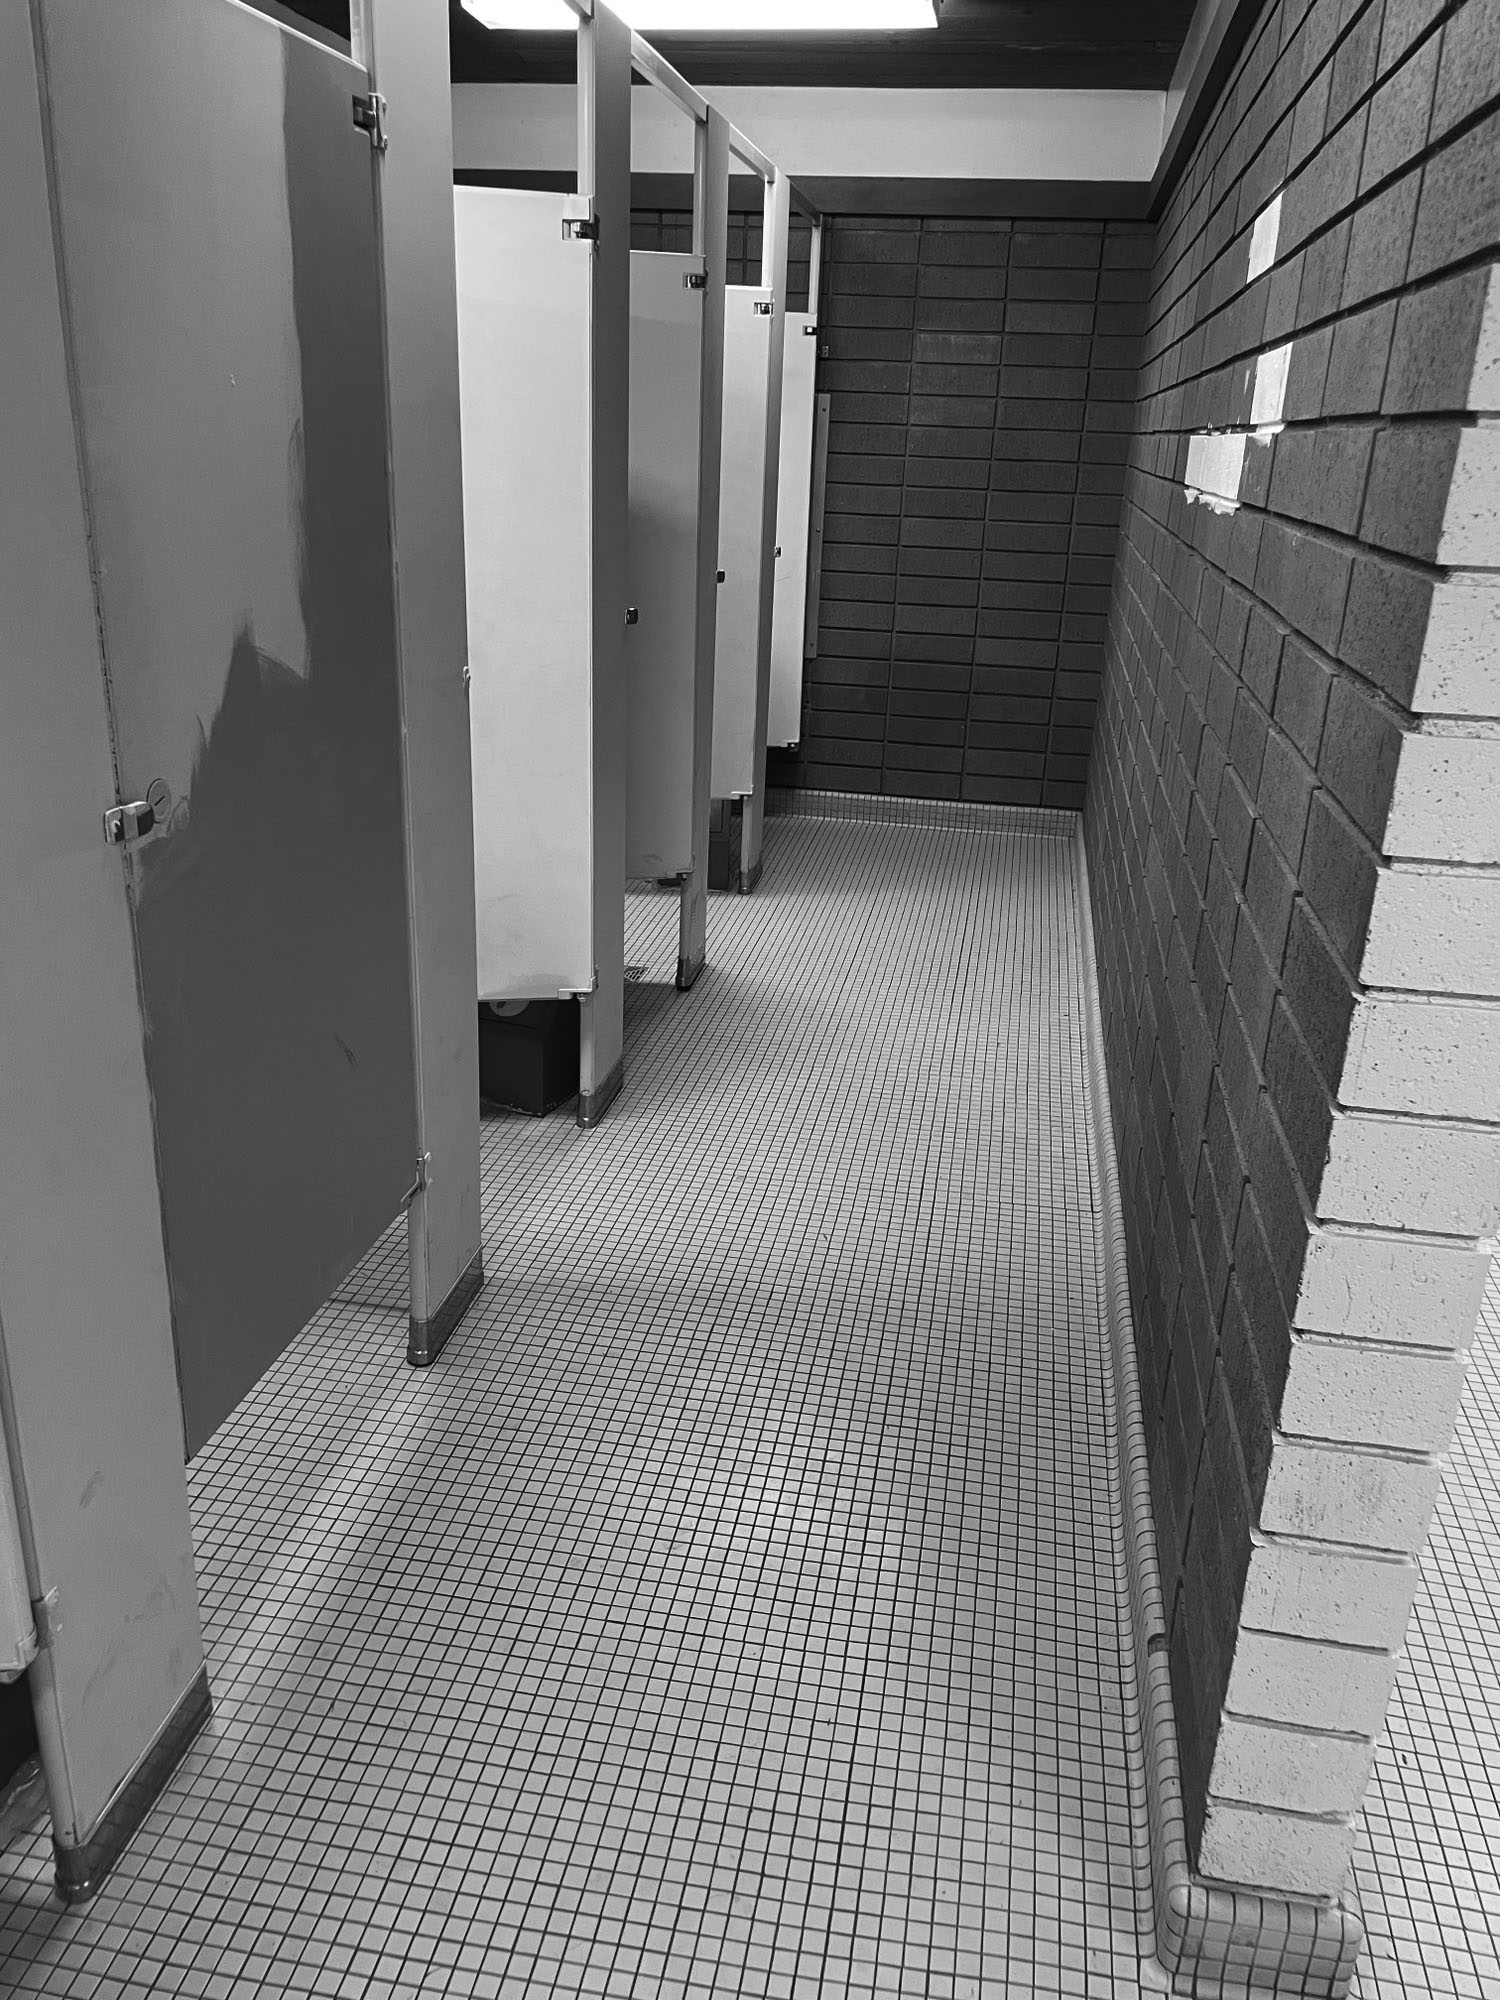 Issues with the Bathrooms on Campus